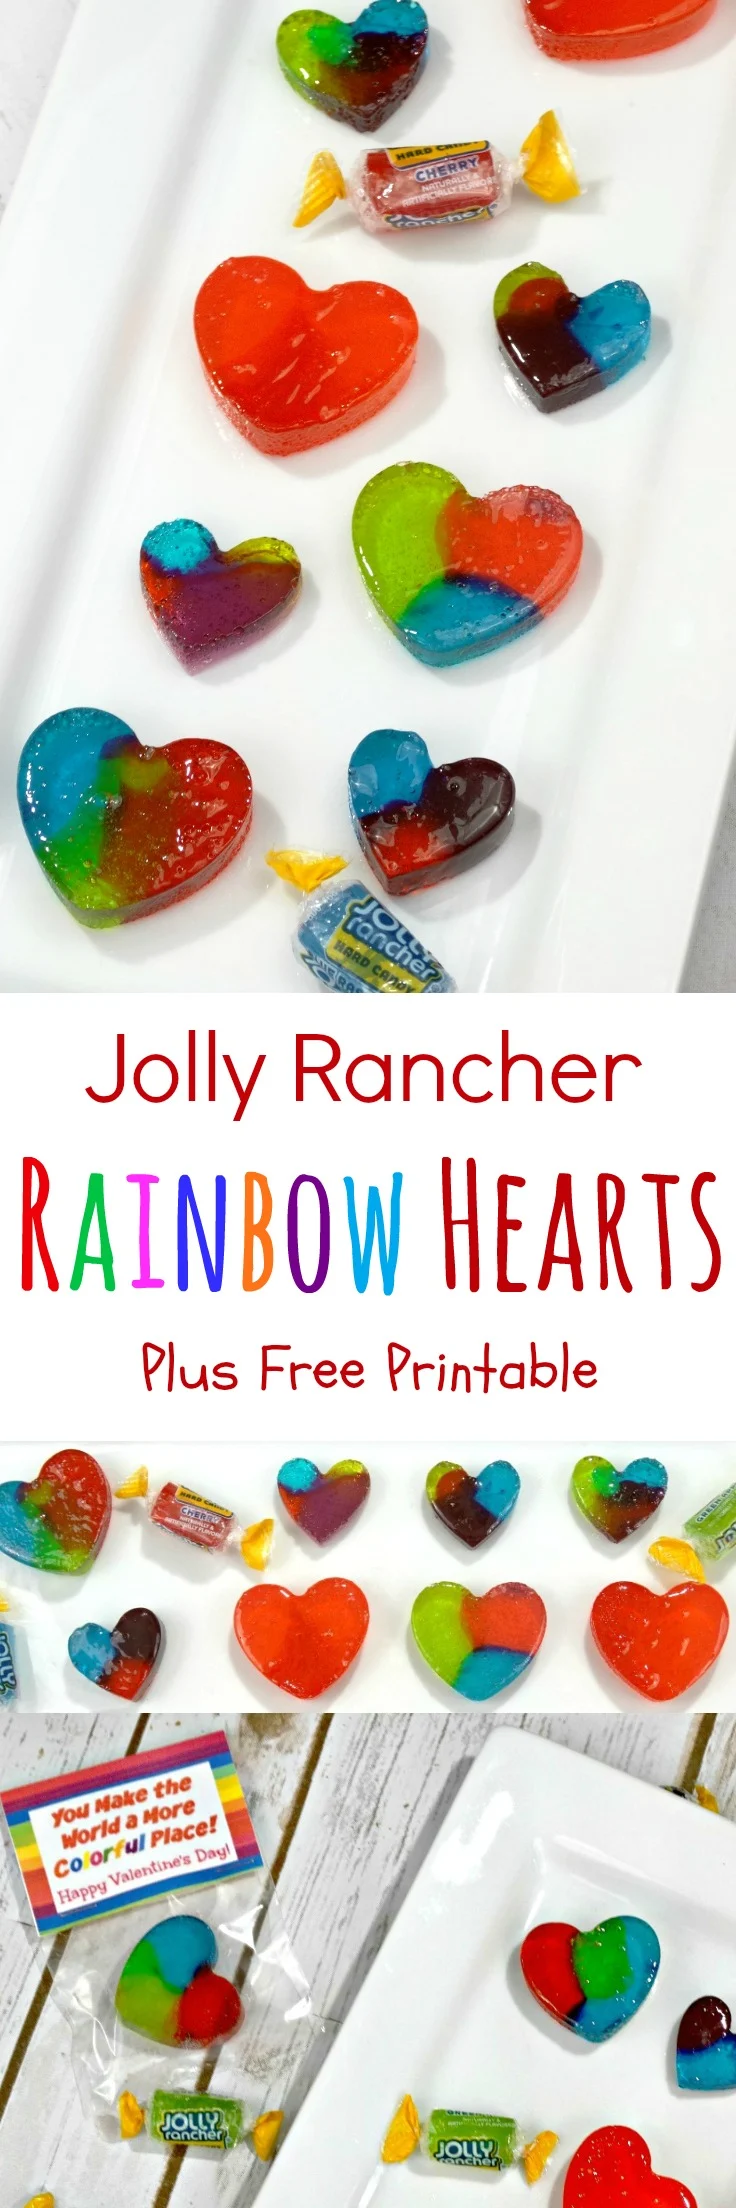 Paired with my free printable Valentine's Day Treat Bag Topper, these Jolly Rancher Homemade Rainbow Hearts Candy make for an adorable Valentine! #ValentinesDay #recipes #homemadecandy #DIYcandy